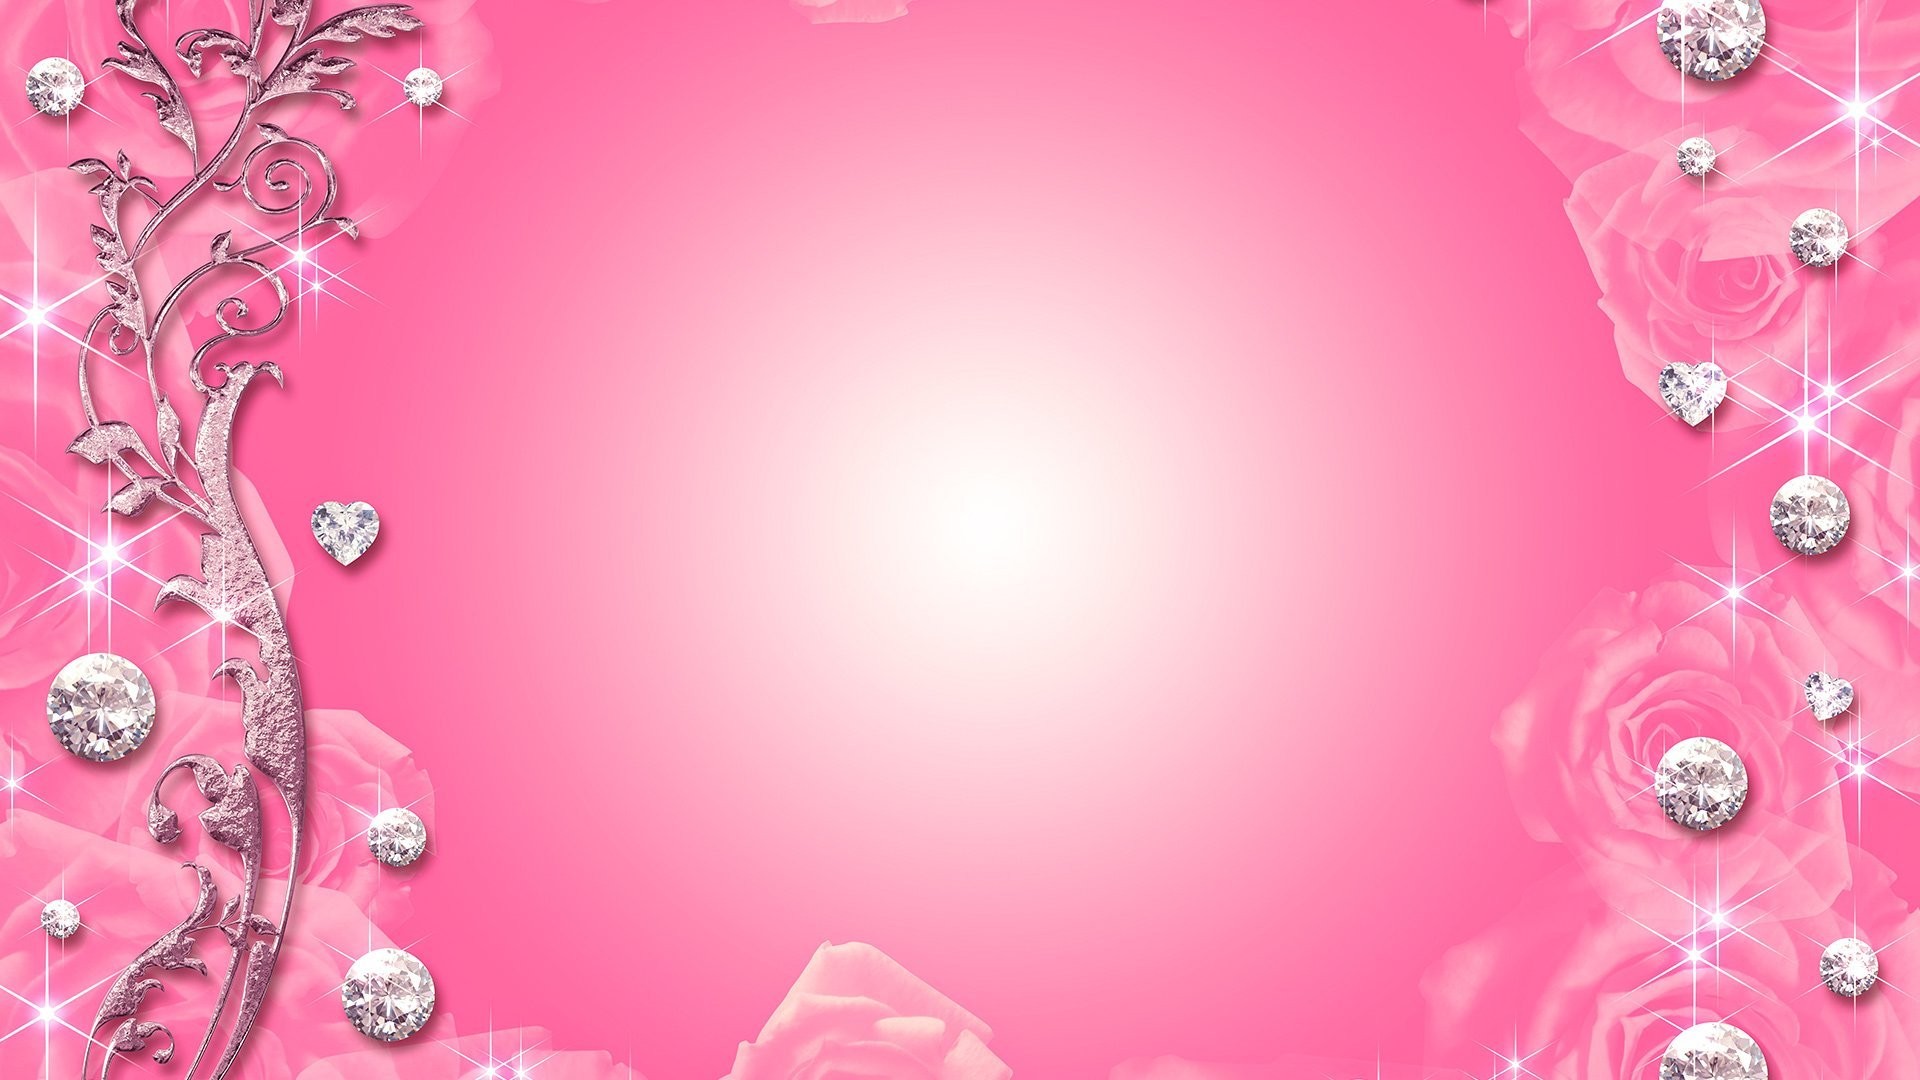 Pink background images